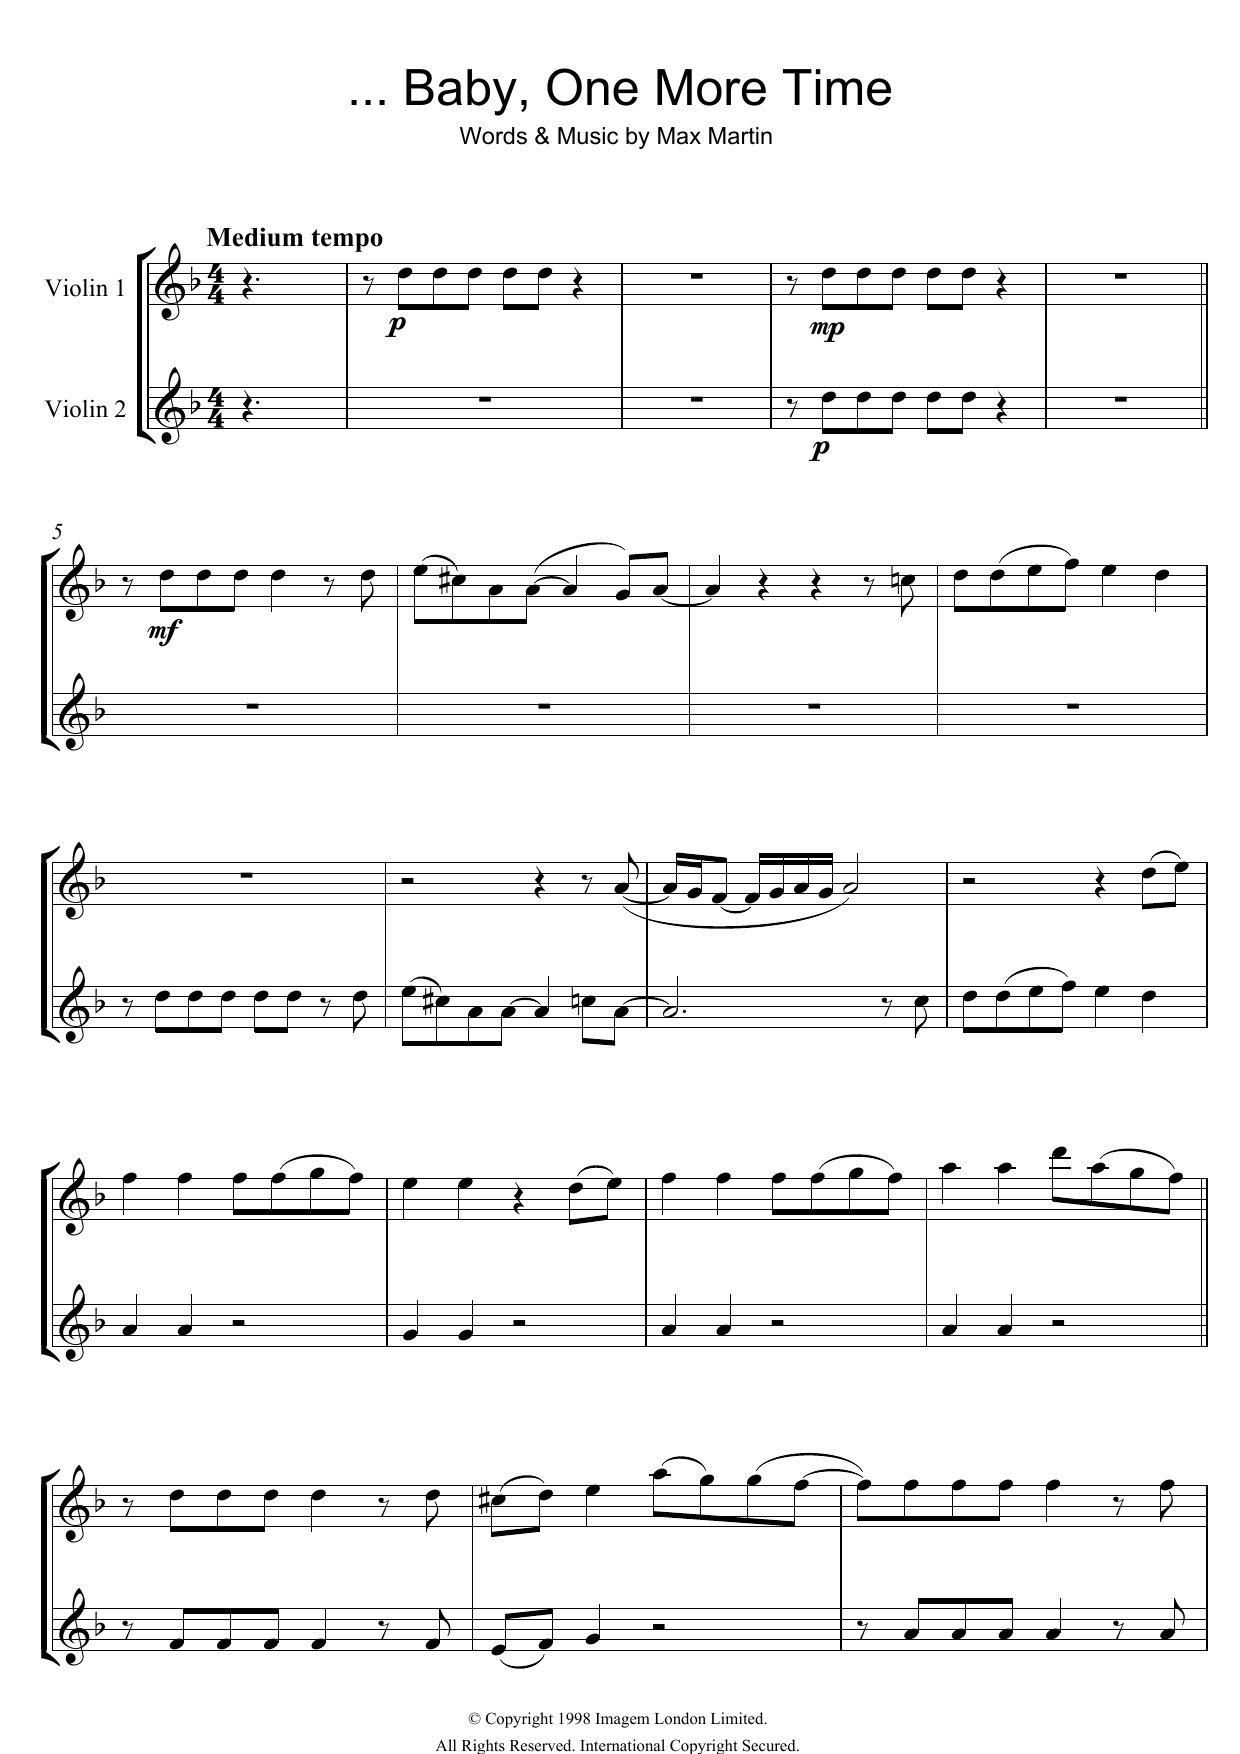 Download Britney Spears ...Baby One More Time Sheet Music